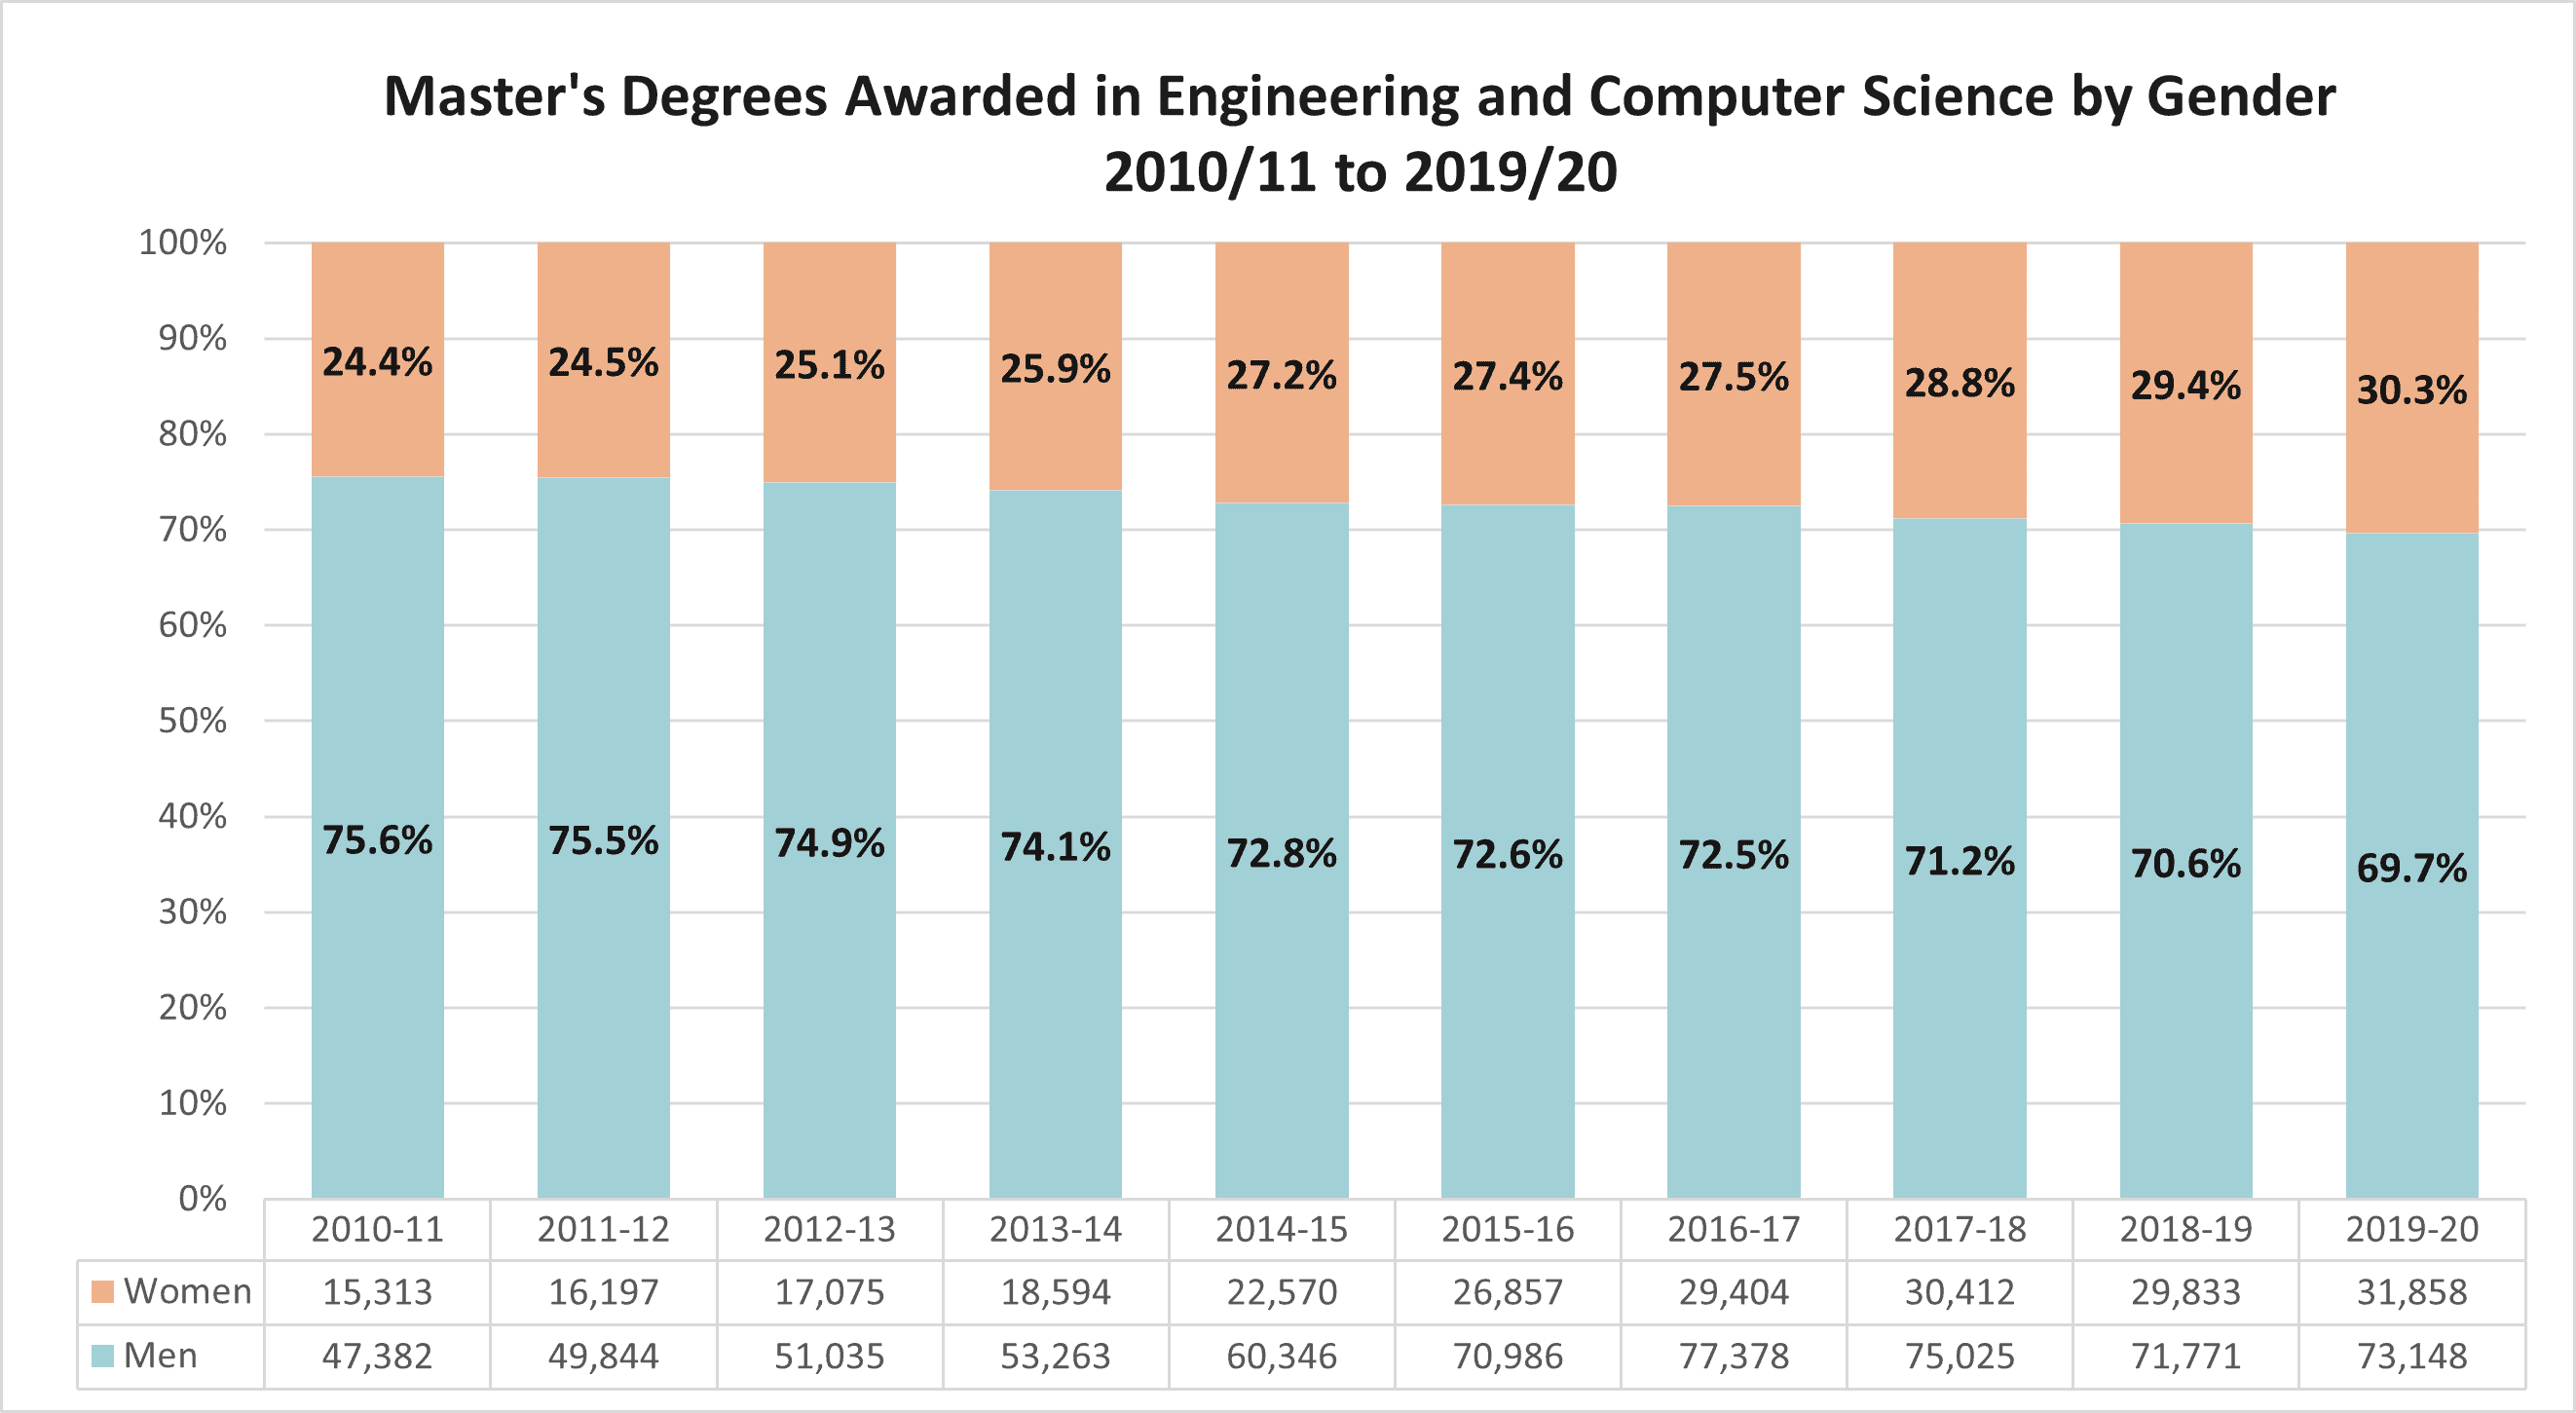 Percent of masters degrees awarded in engineering and computer science